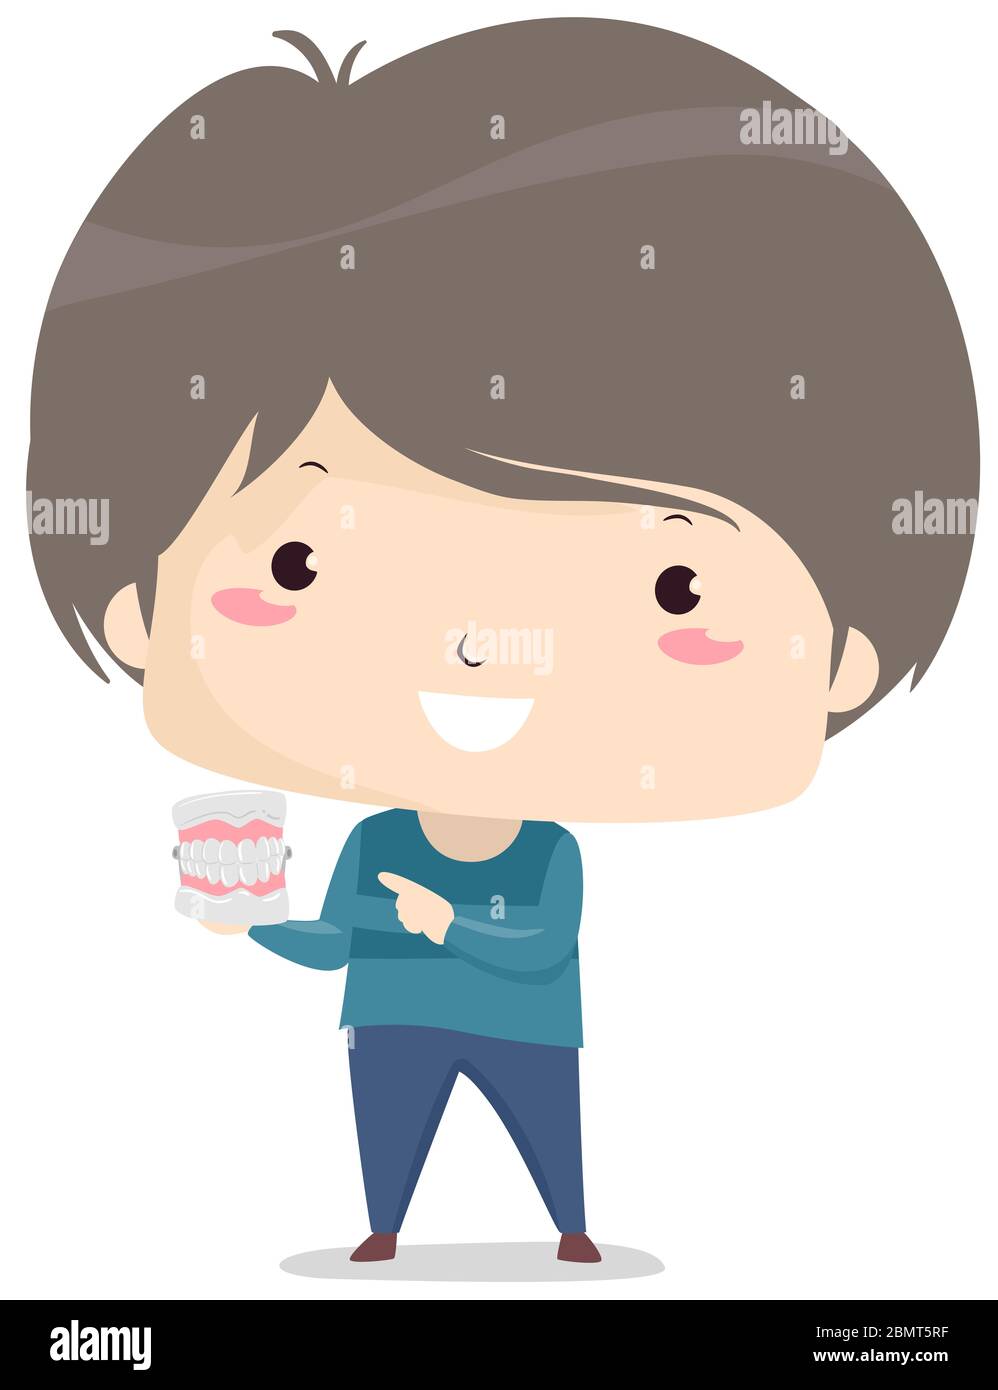 Illustration of Kid Boy Holding and Pointing to a Human Teeth Model Stock Photo